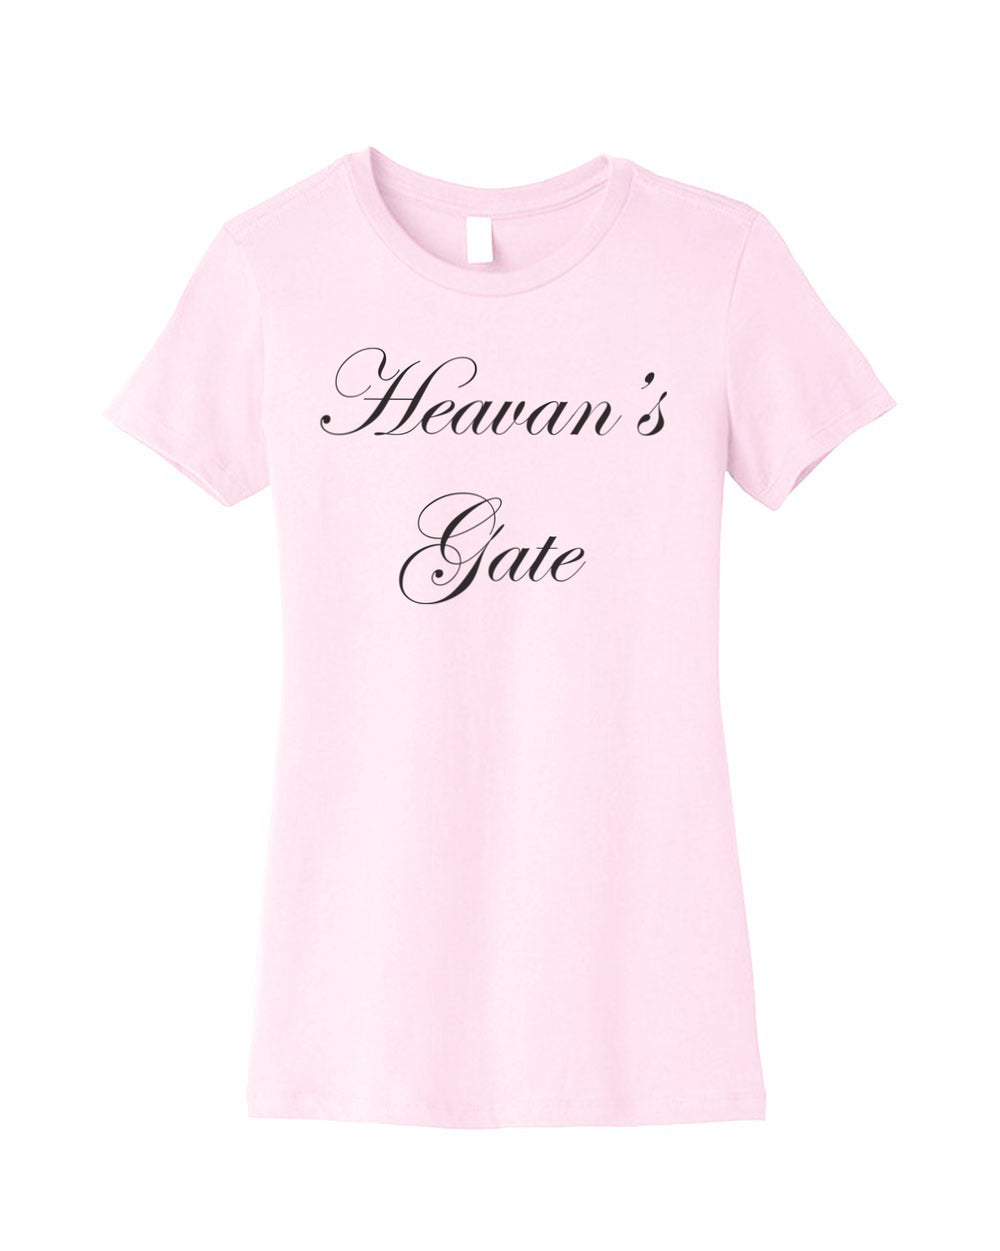 Heavens Gate | Fitted Tee